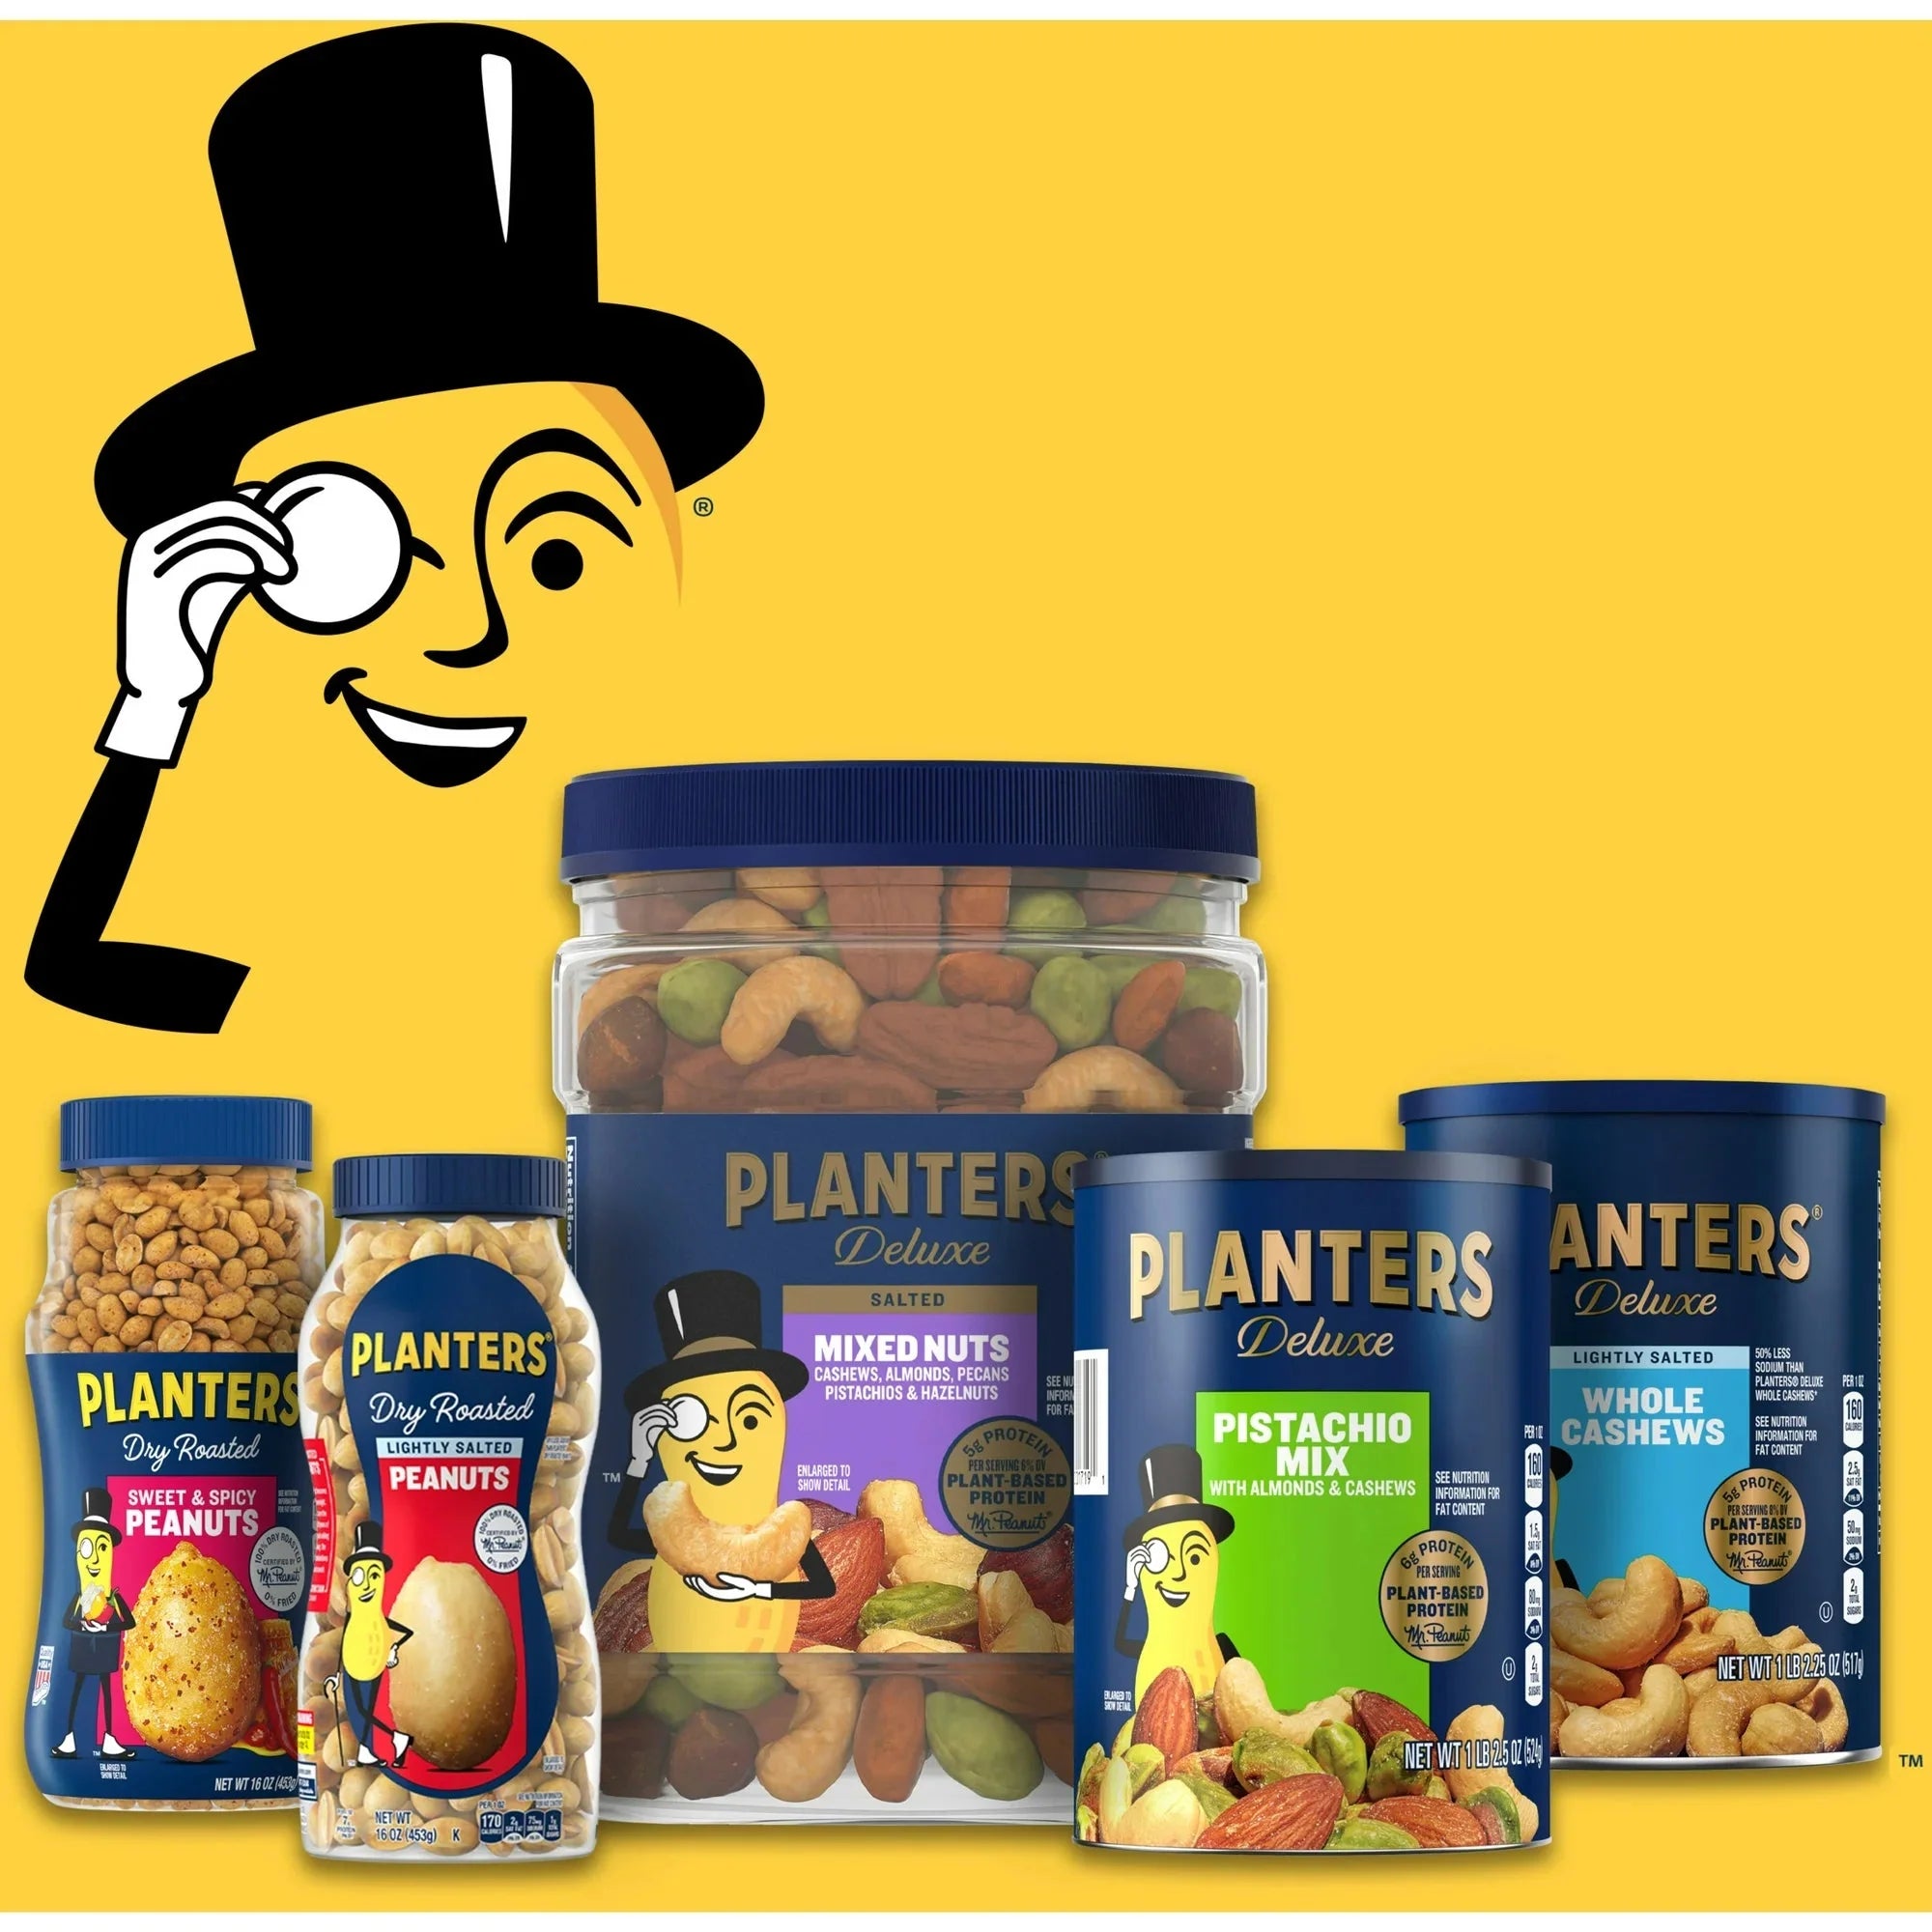 Wholesale prices with free shipping all over United States PLANTERS Deluxe Salted Mixed Nuts, Party Snacks, Plant-Based Protein 34oz (1 Container) - Steven Deals